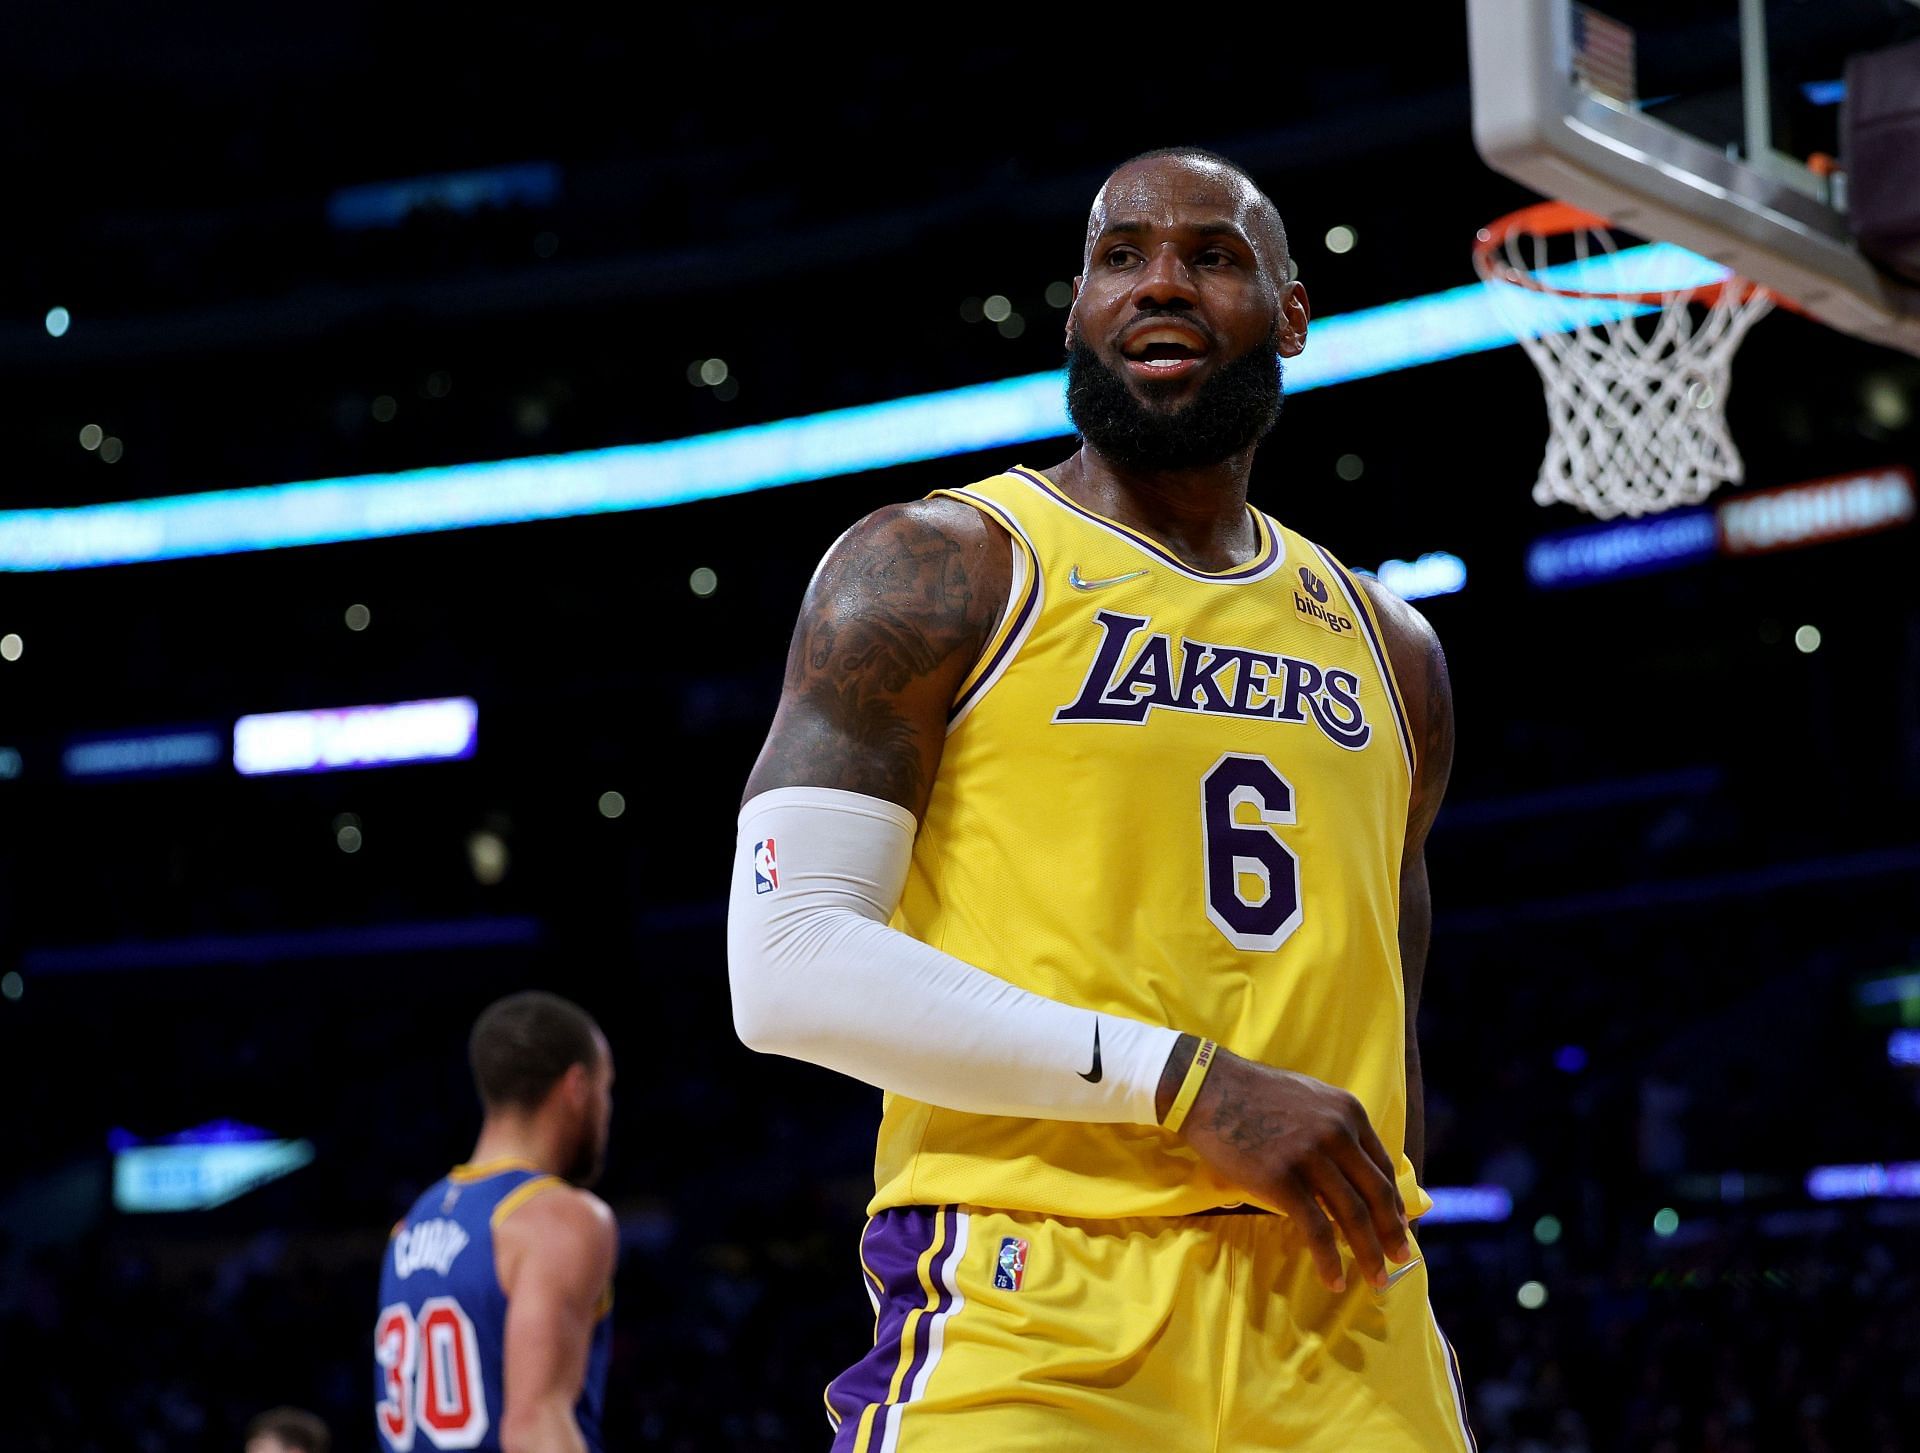 LeBron James of the LA Lakers against the Golden State Warriors